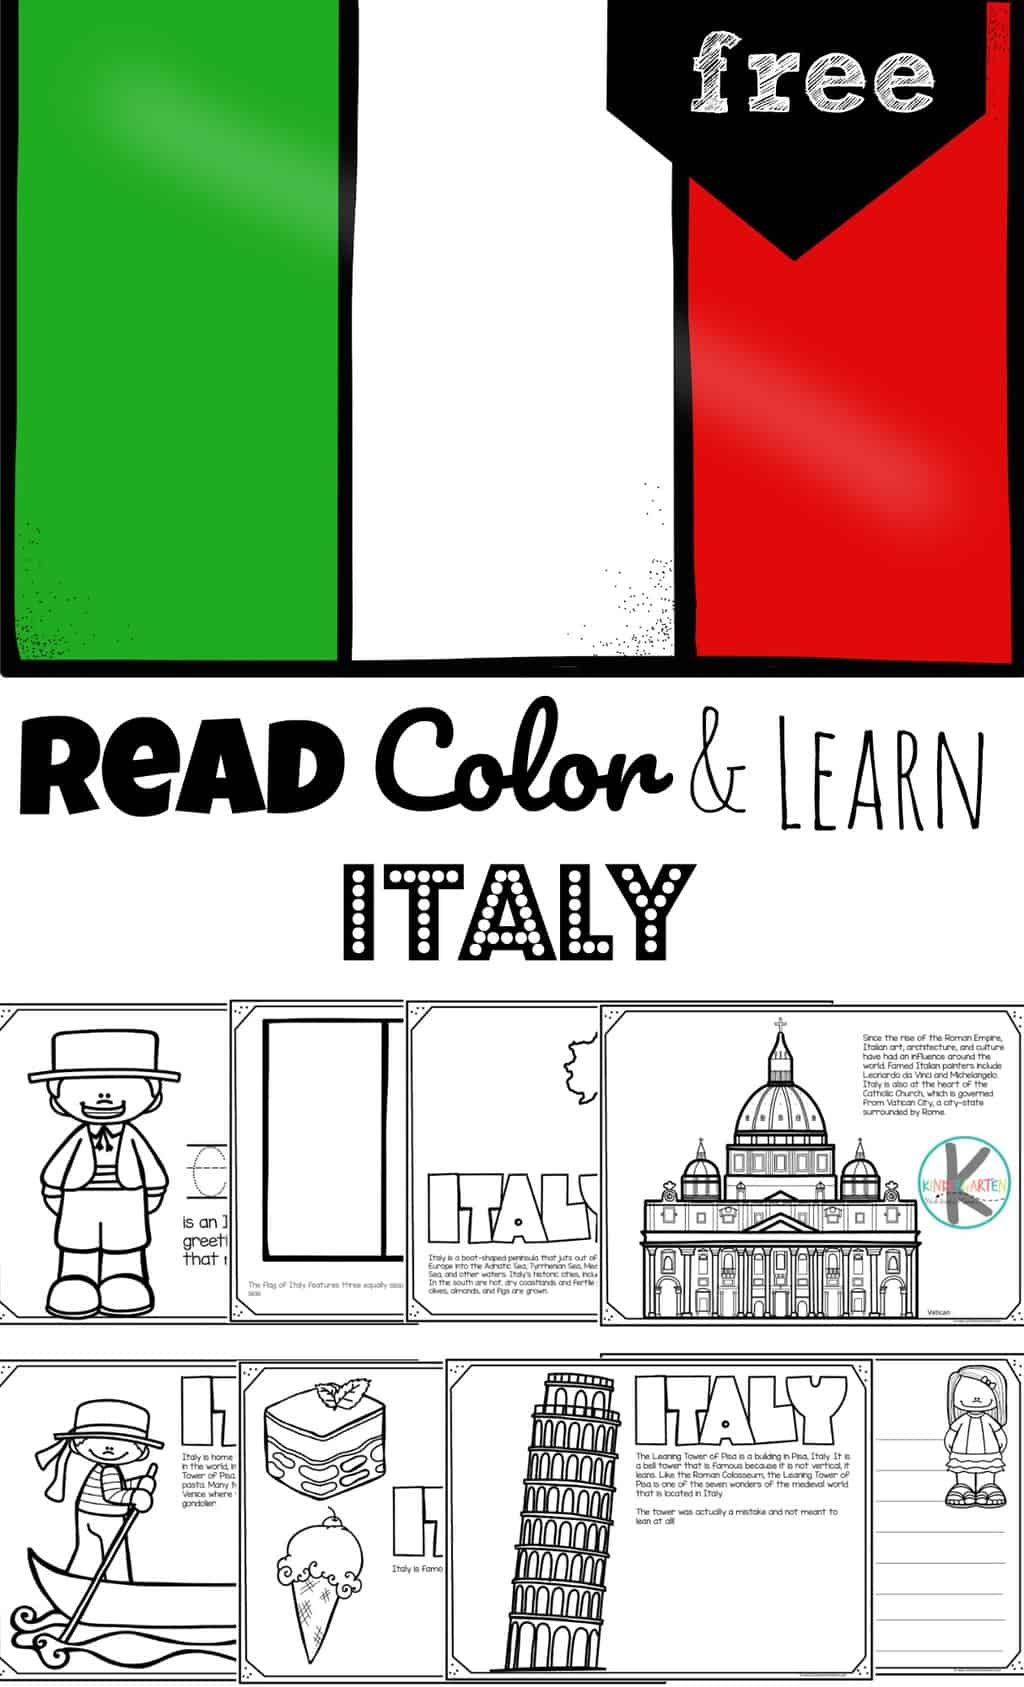 Free italy coloring pages